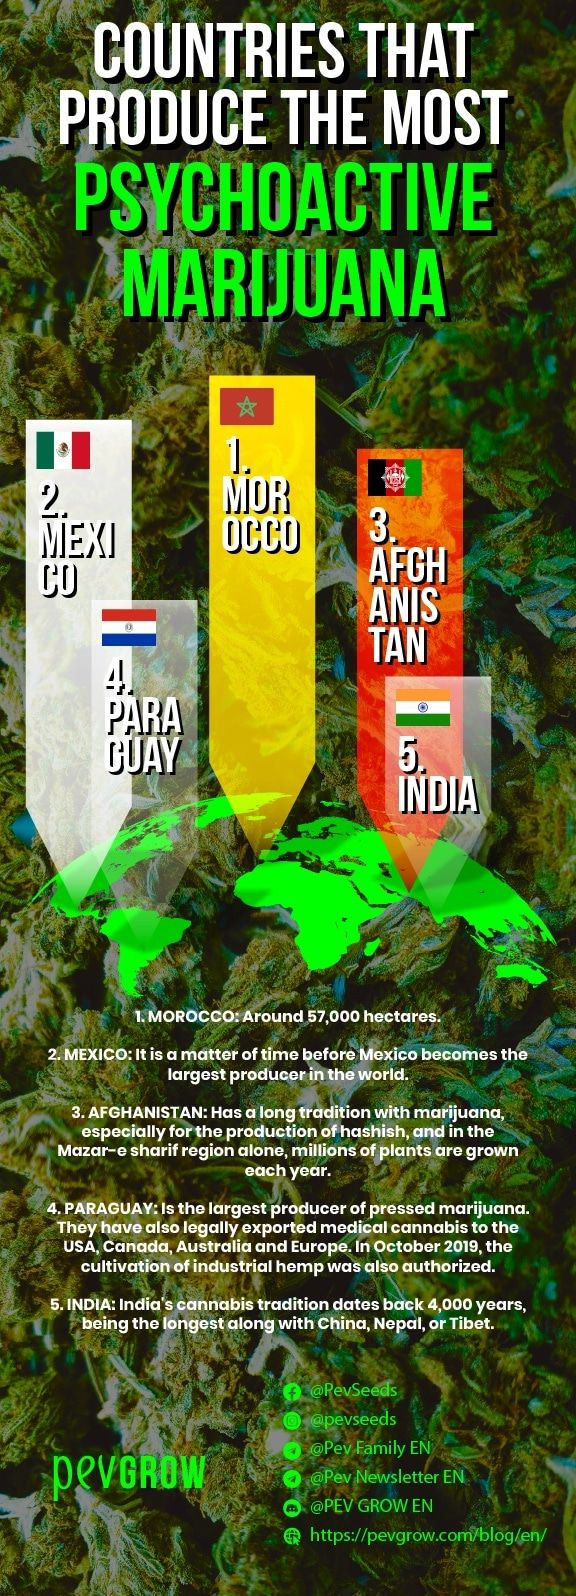 Infographic on the countries that produce the most psychoactive marijuana